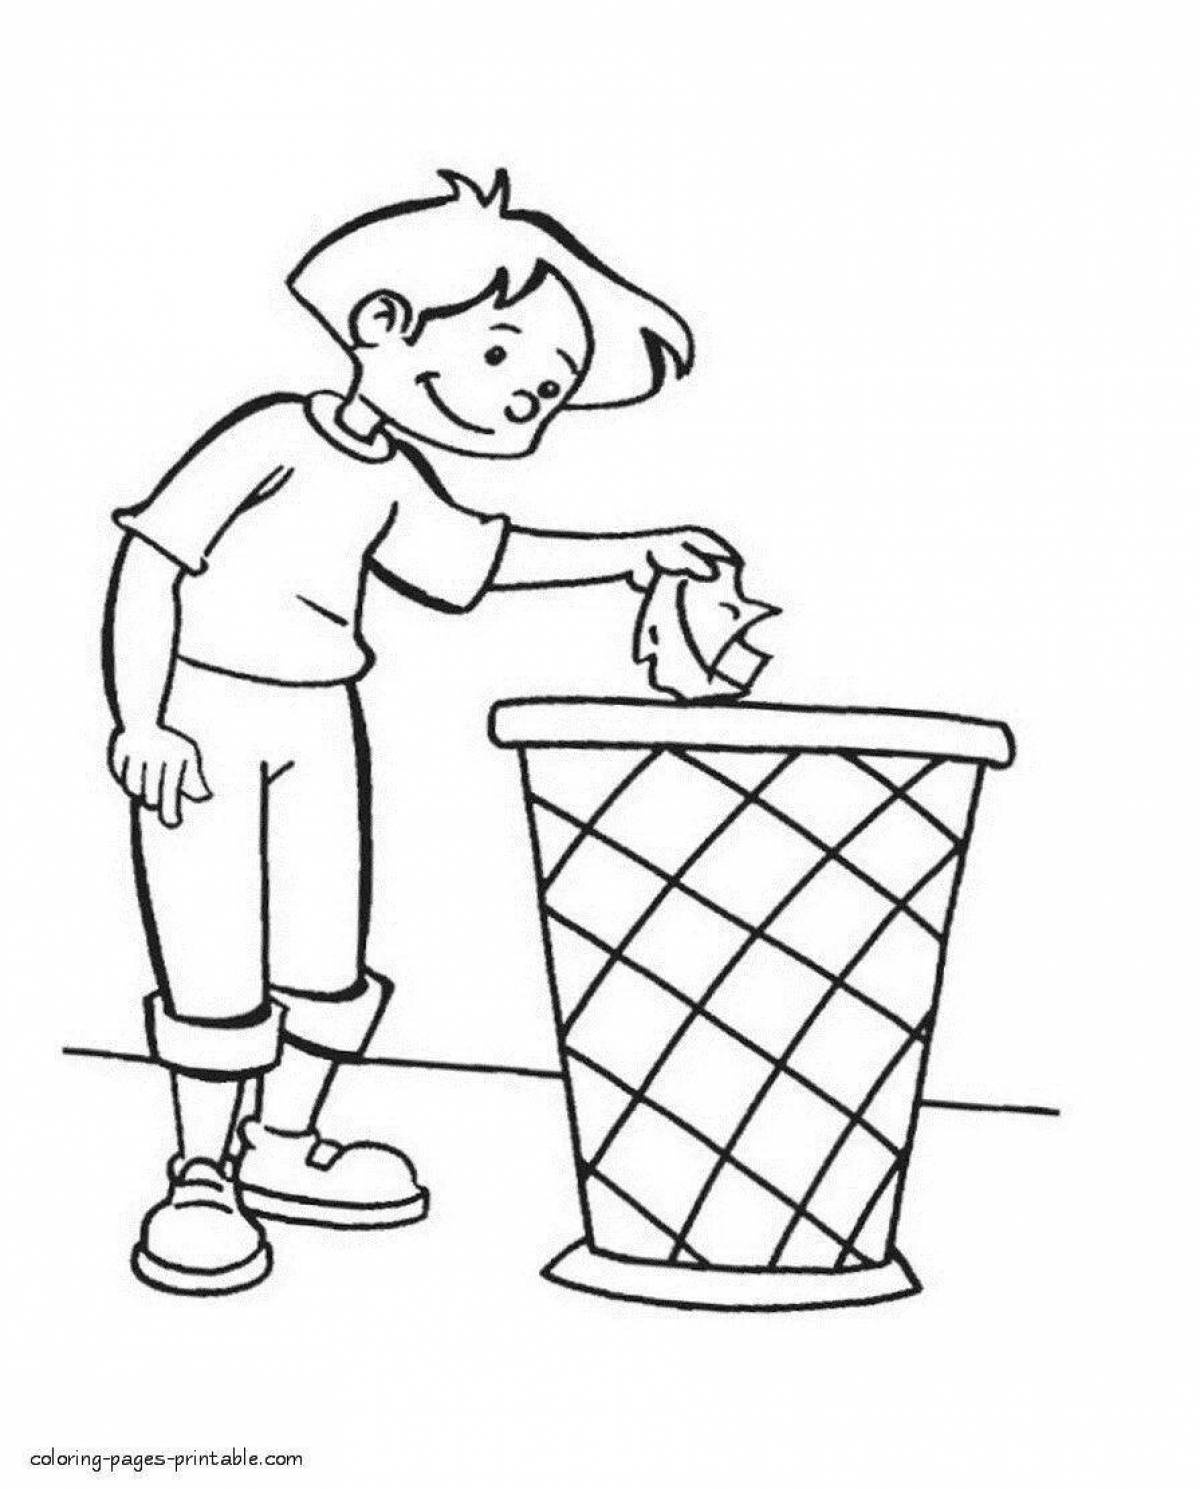 Fun garbage collection coloring page